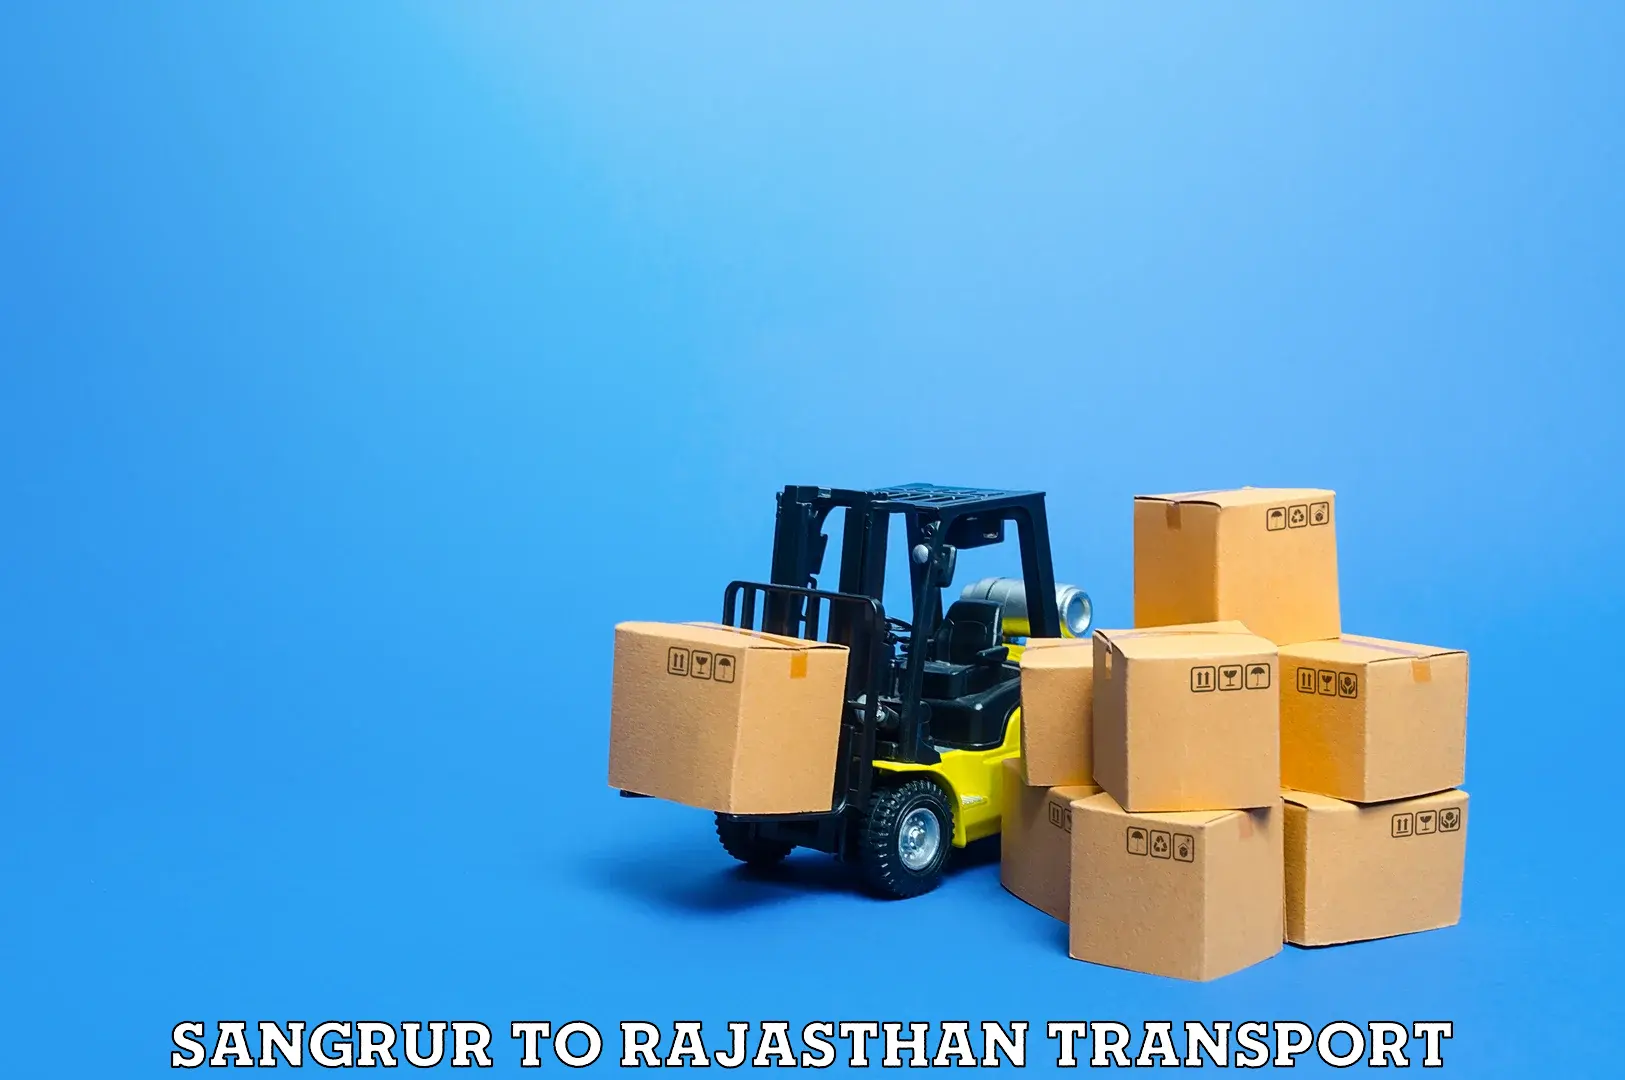 Container transport service Sangrur to Rajasthan